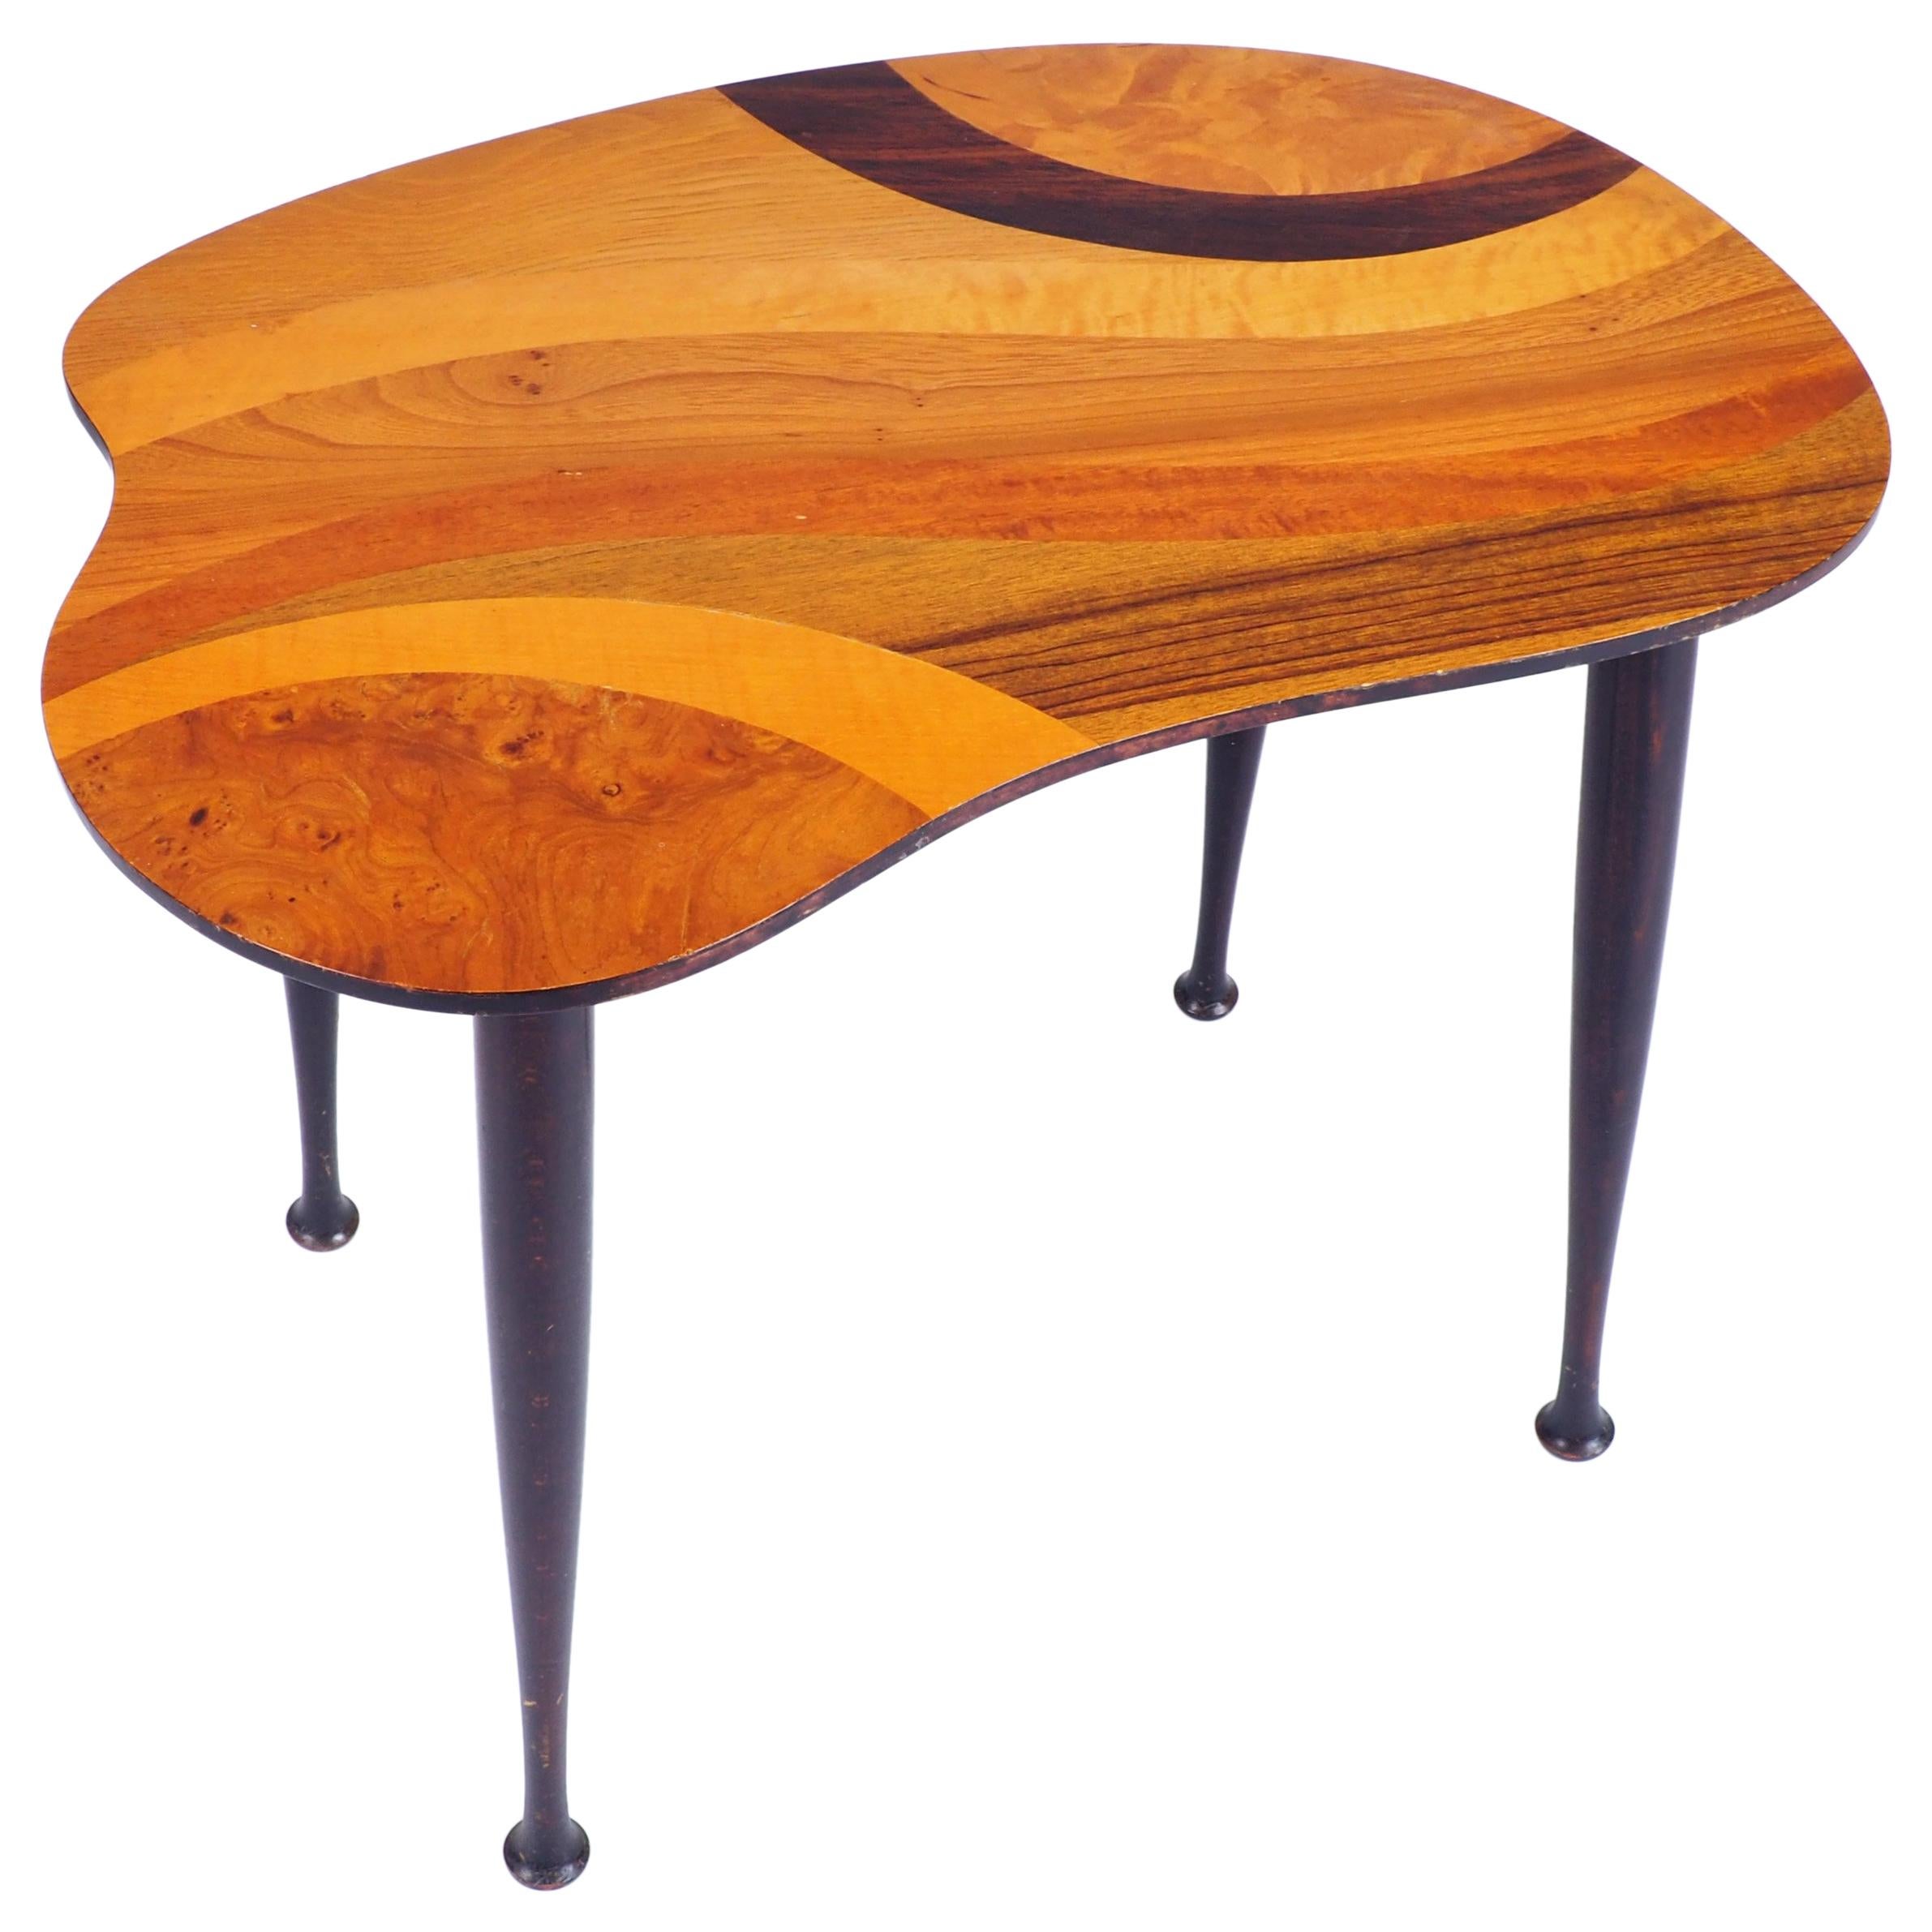 Side Table with Inlaid Wood Top